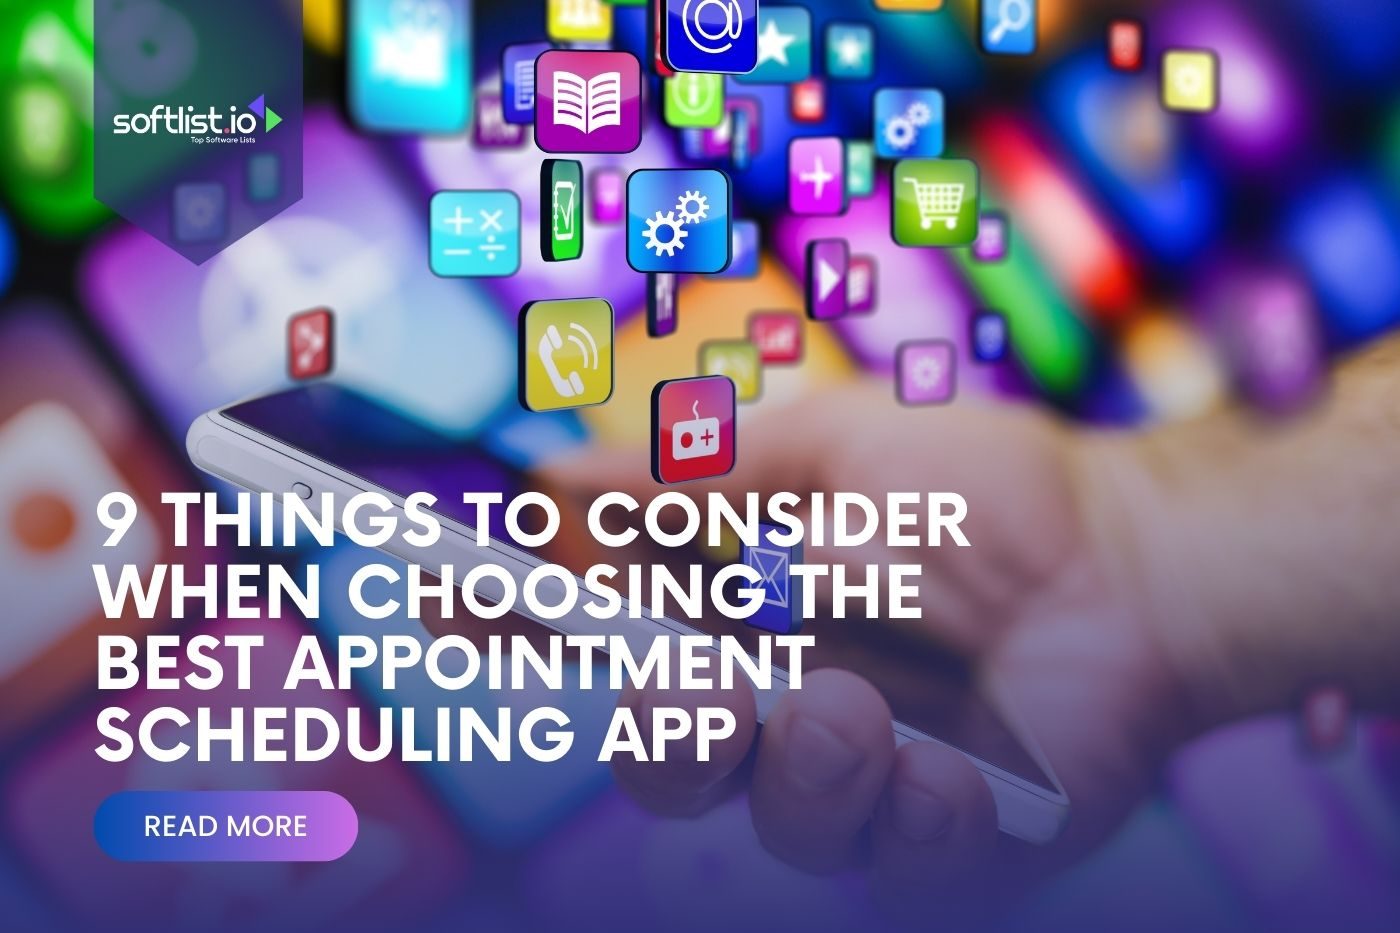 9 Things to Consider When Choosing the Best Appointment Scheduling App